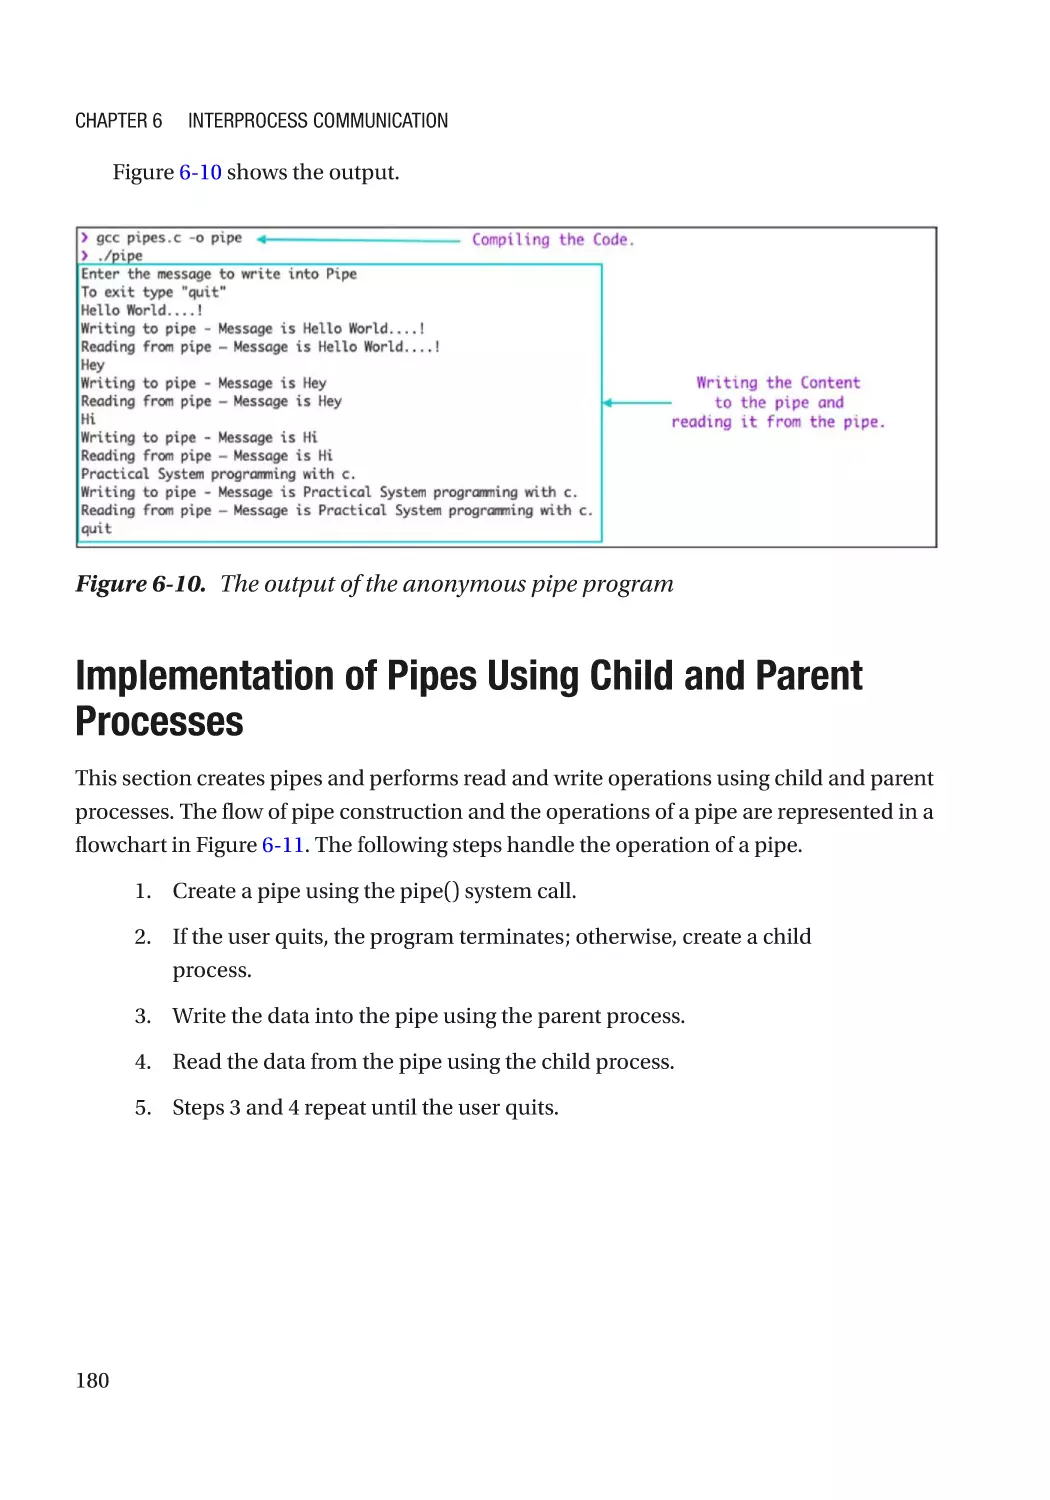 Implementation of Pipes Using Child and Parent Processes